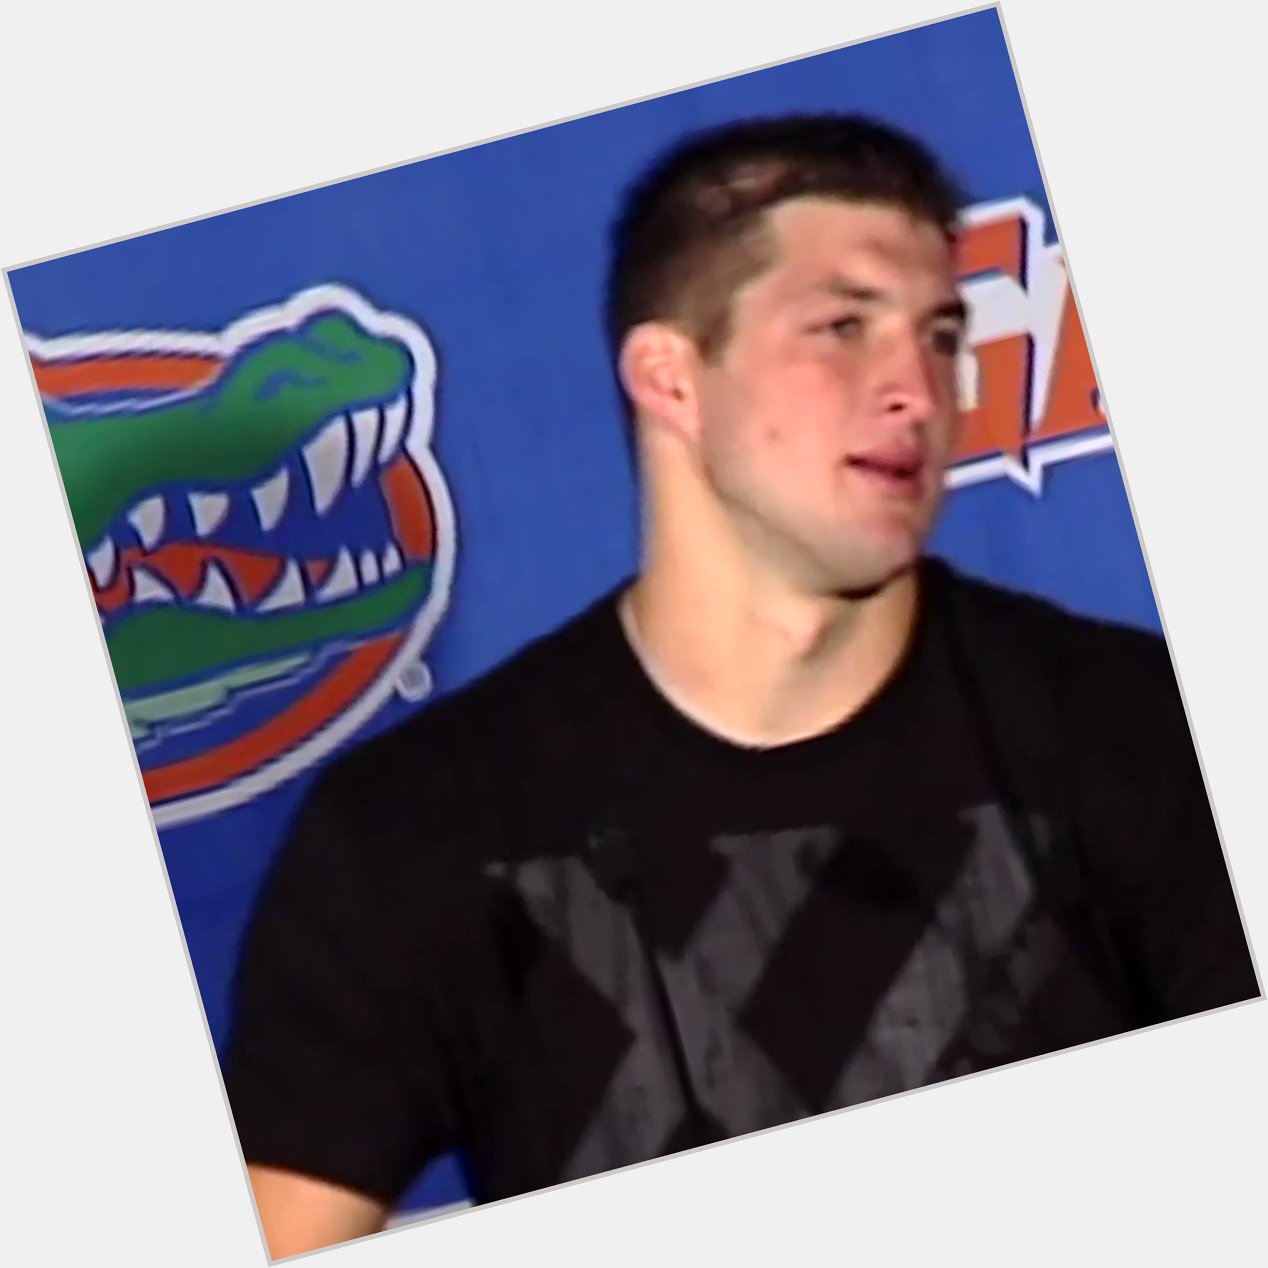 Happy birthday today to Tim Tebow 